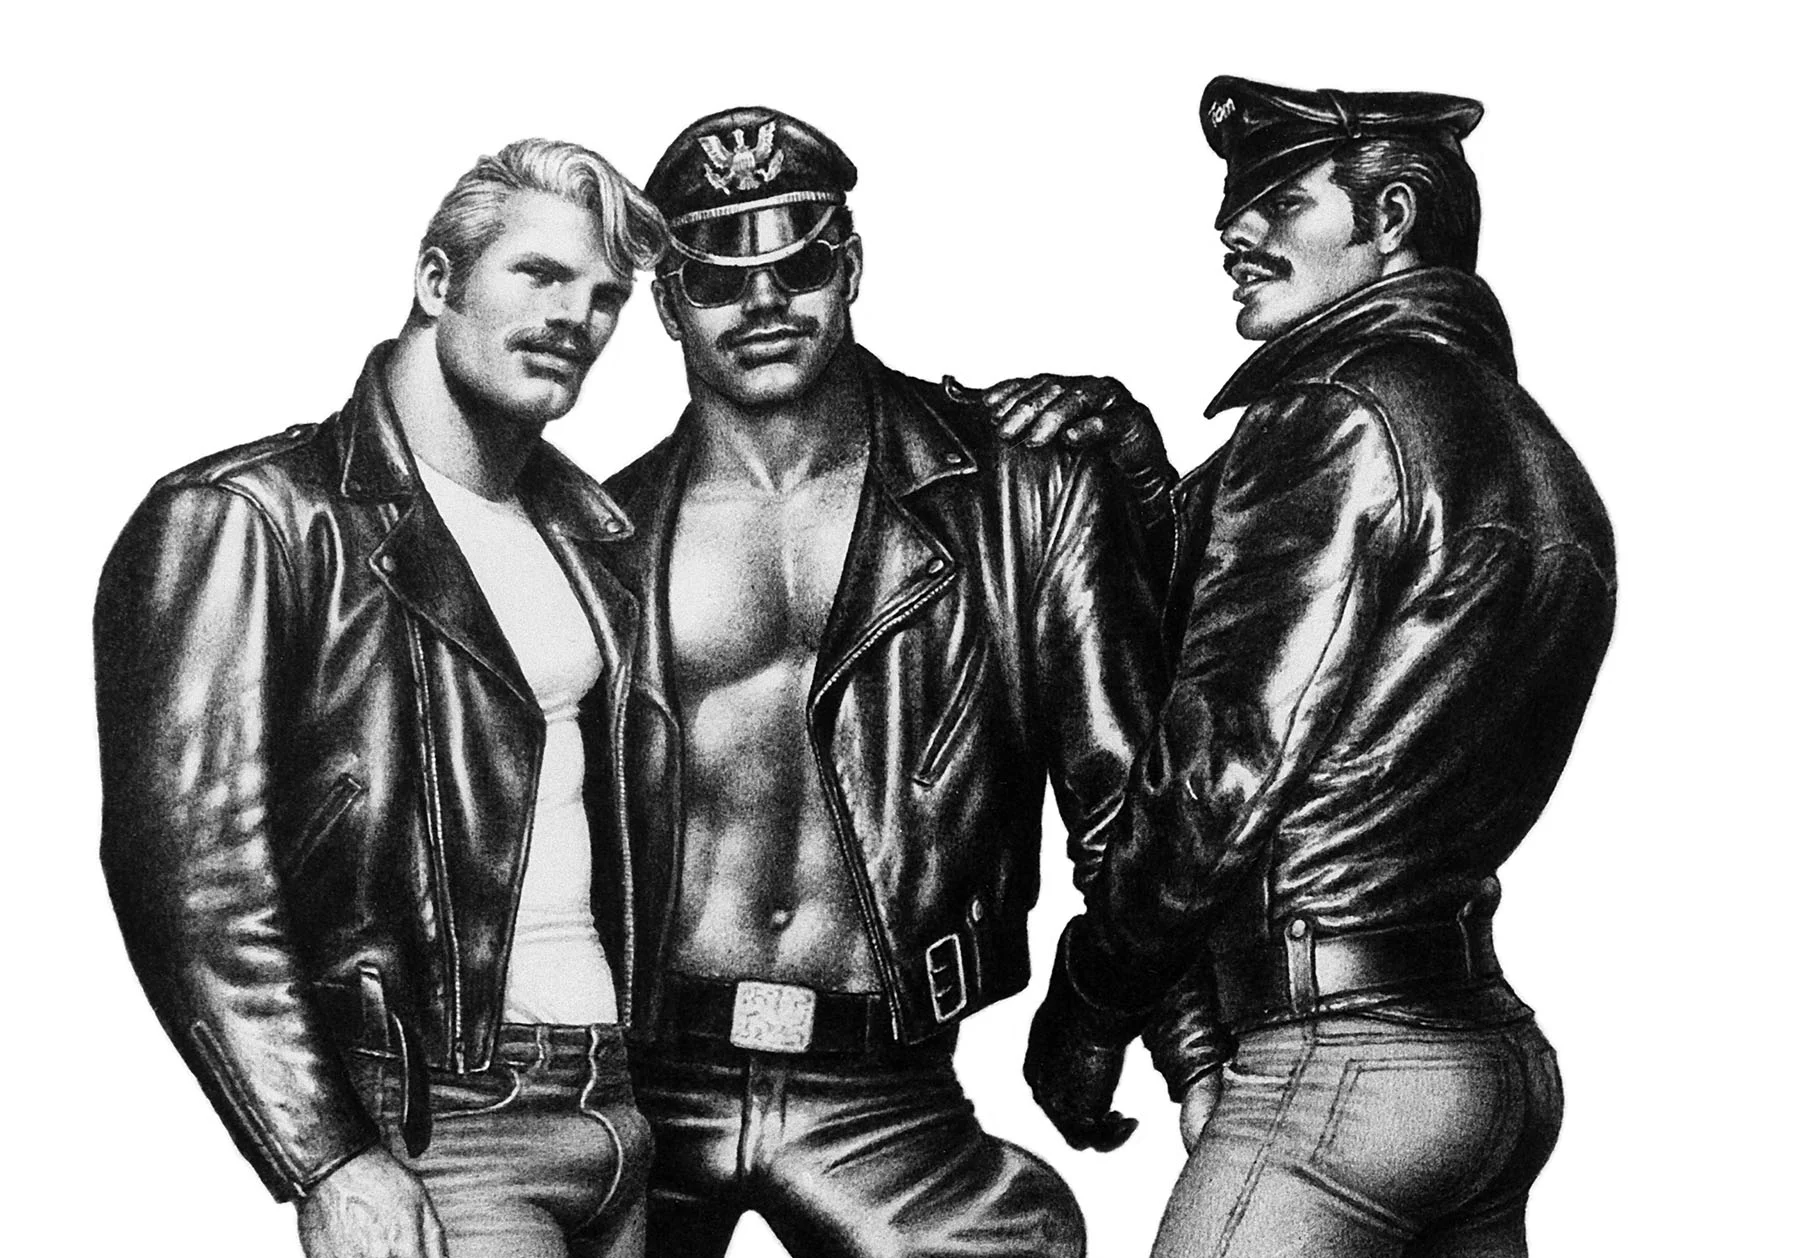 Cover Image - Tom of Finland